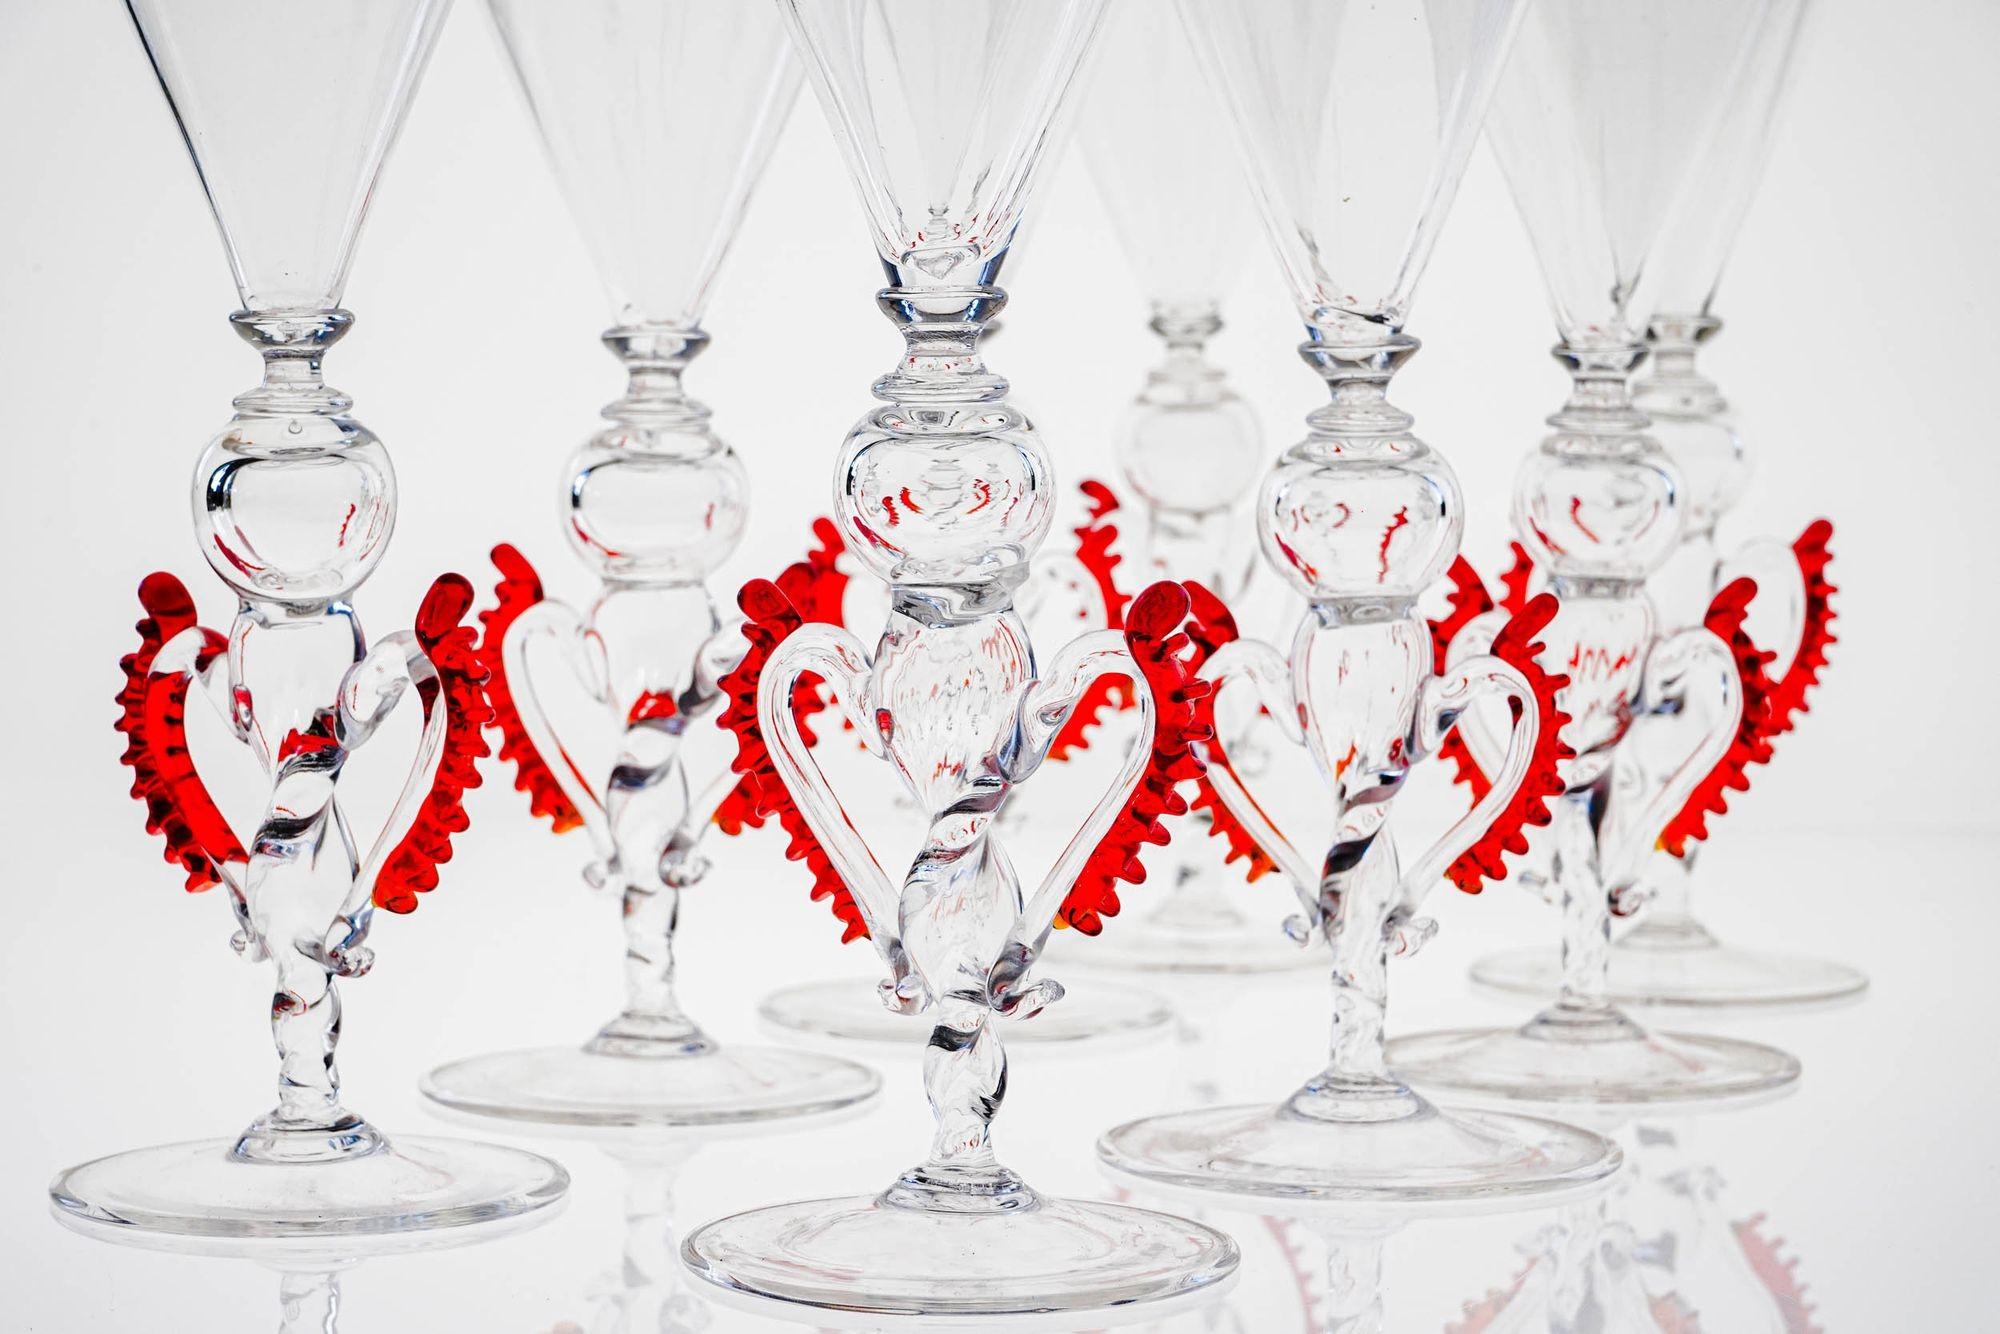 Set of 8 Classic Cenedese Murano Glass Goblets Tipetti, clear with red accents im Zustand „Hervorragend“ im Angebot in Tavarnelle val di Pesa, Florence